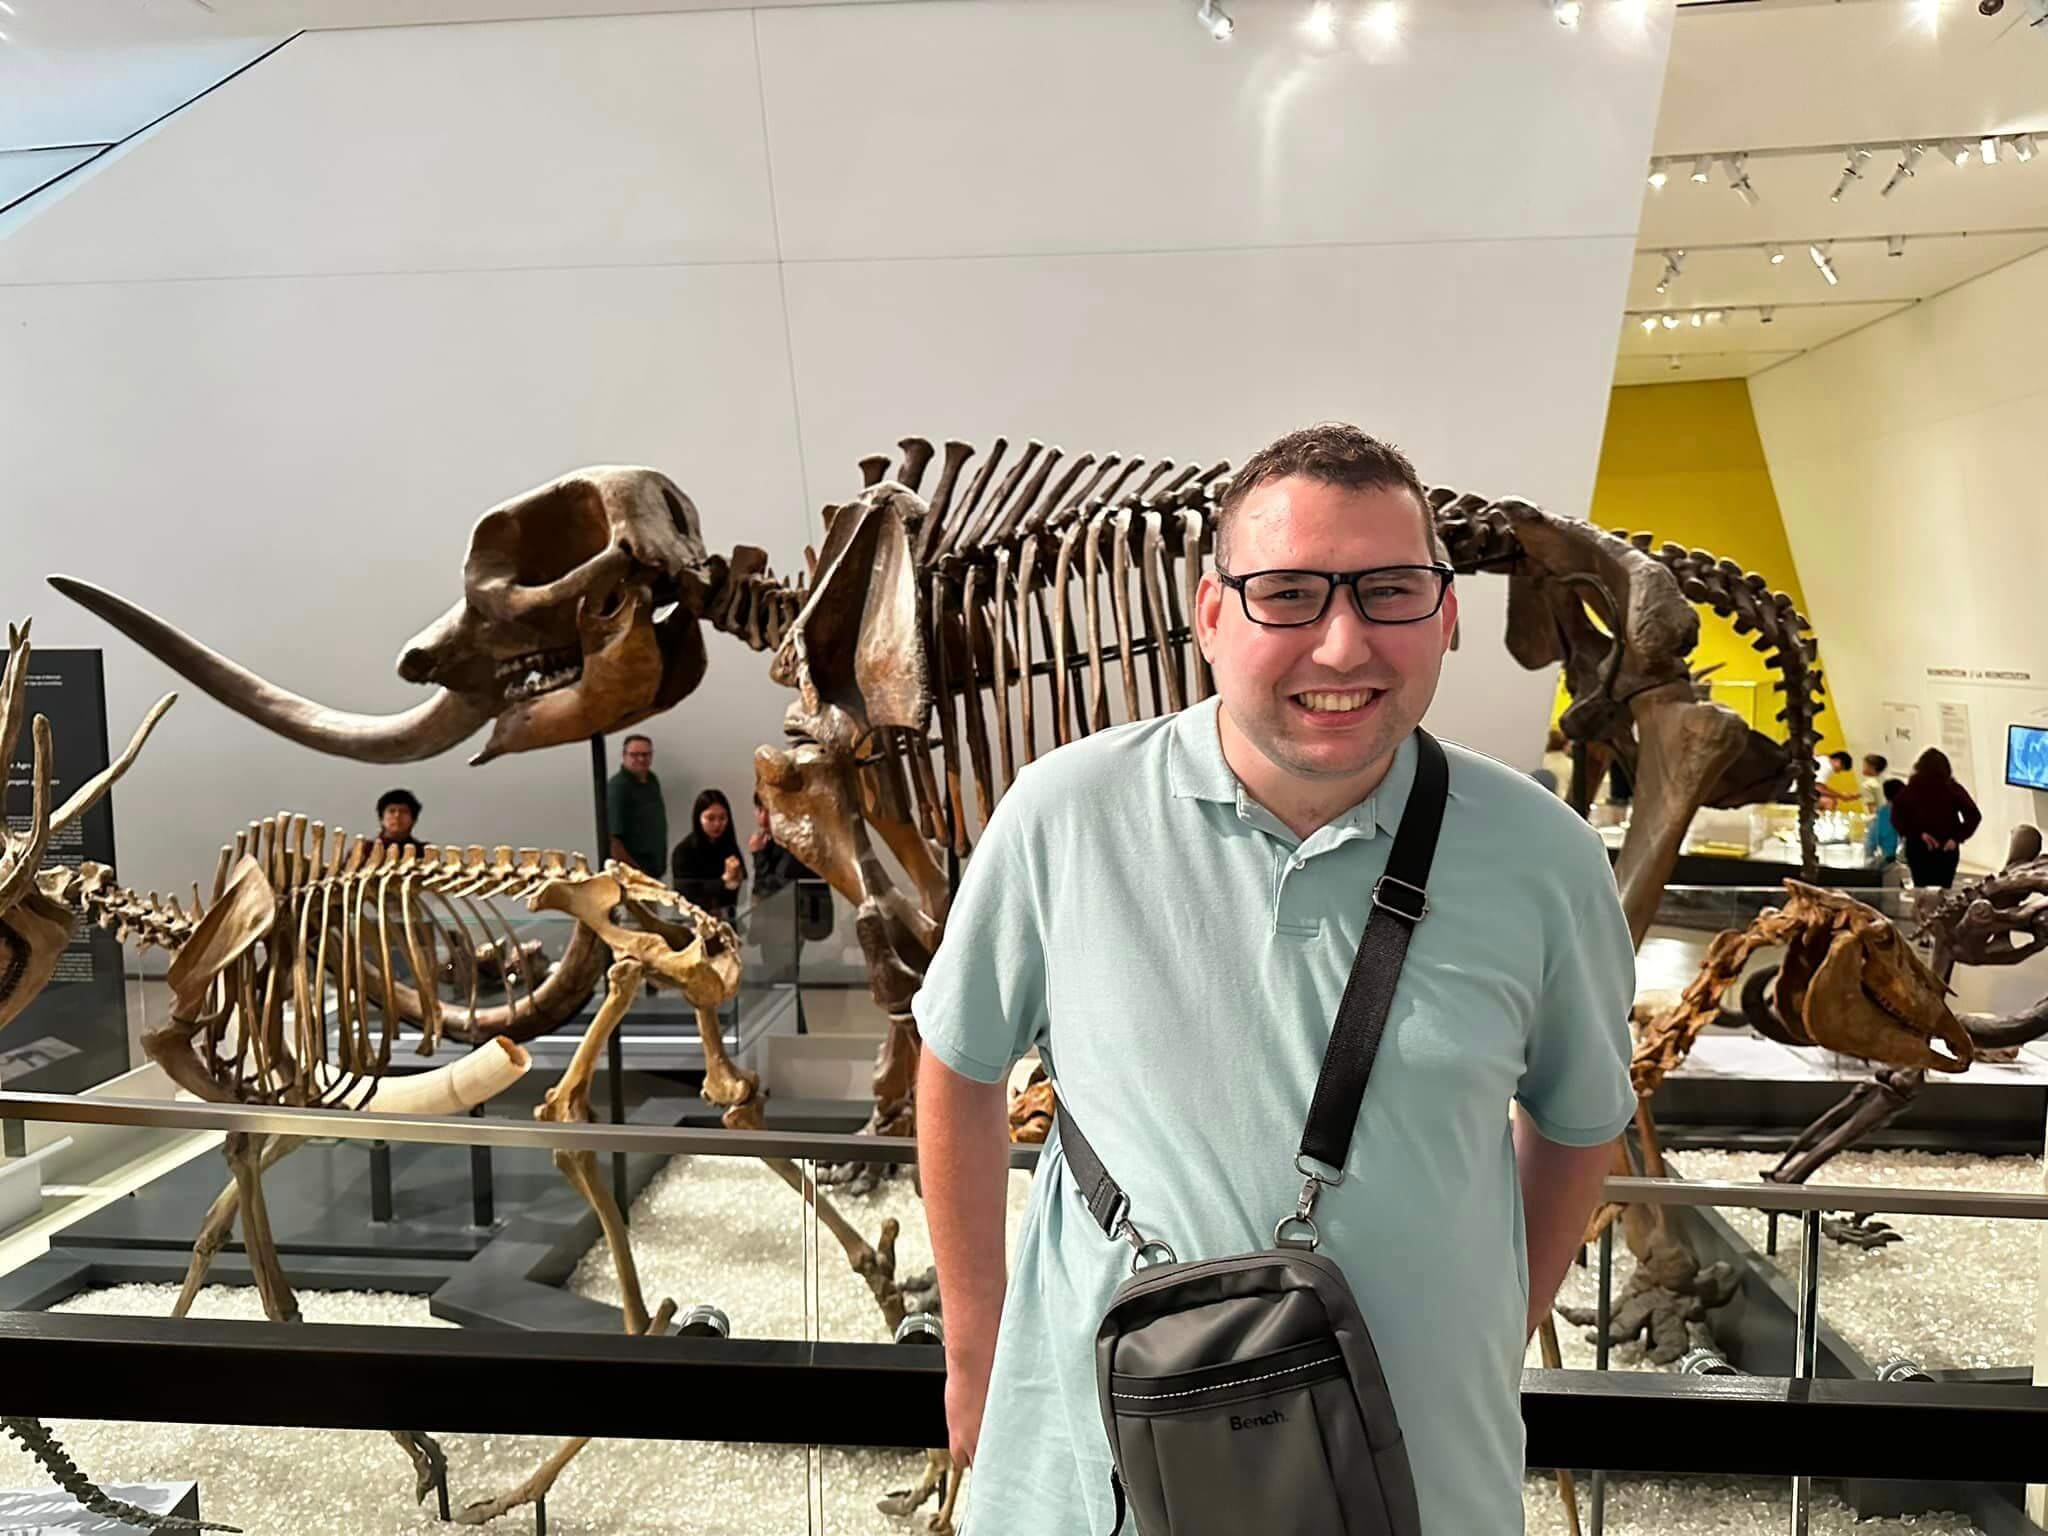 A man is smiling at the camera, and behind him, there is a dinosaur skeleton.